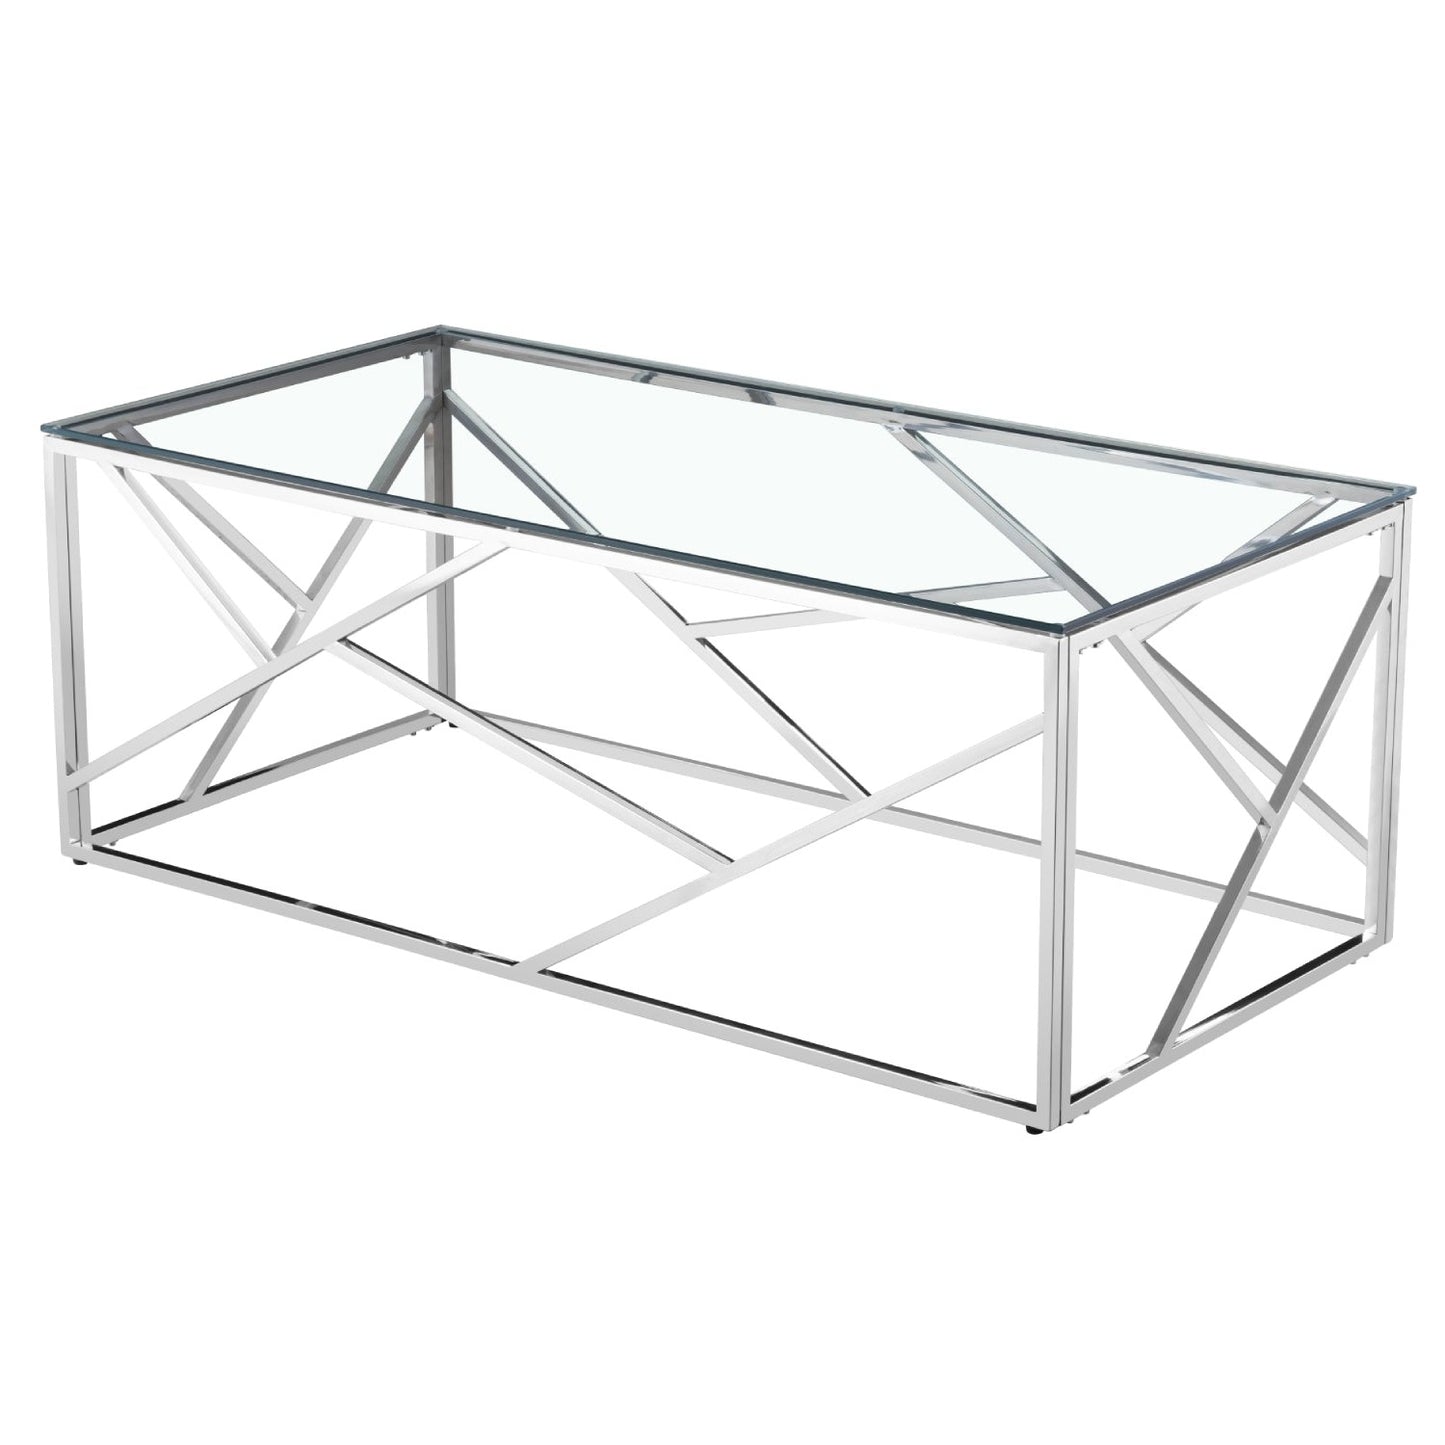 Geometric silver coffee table by Native